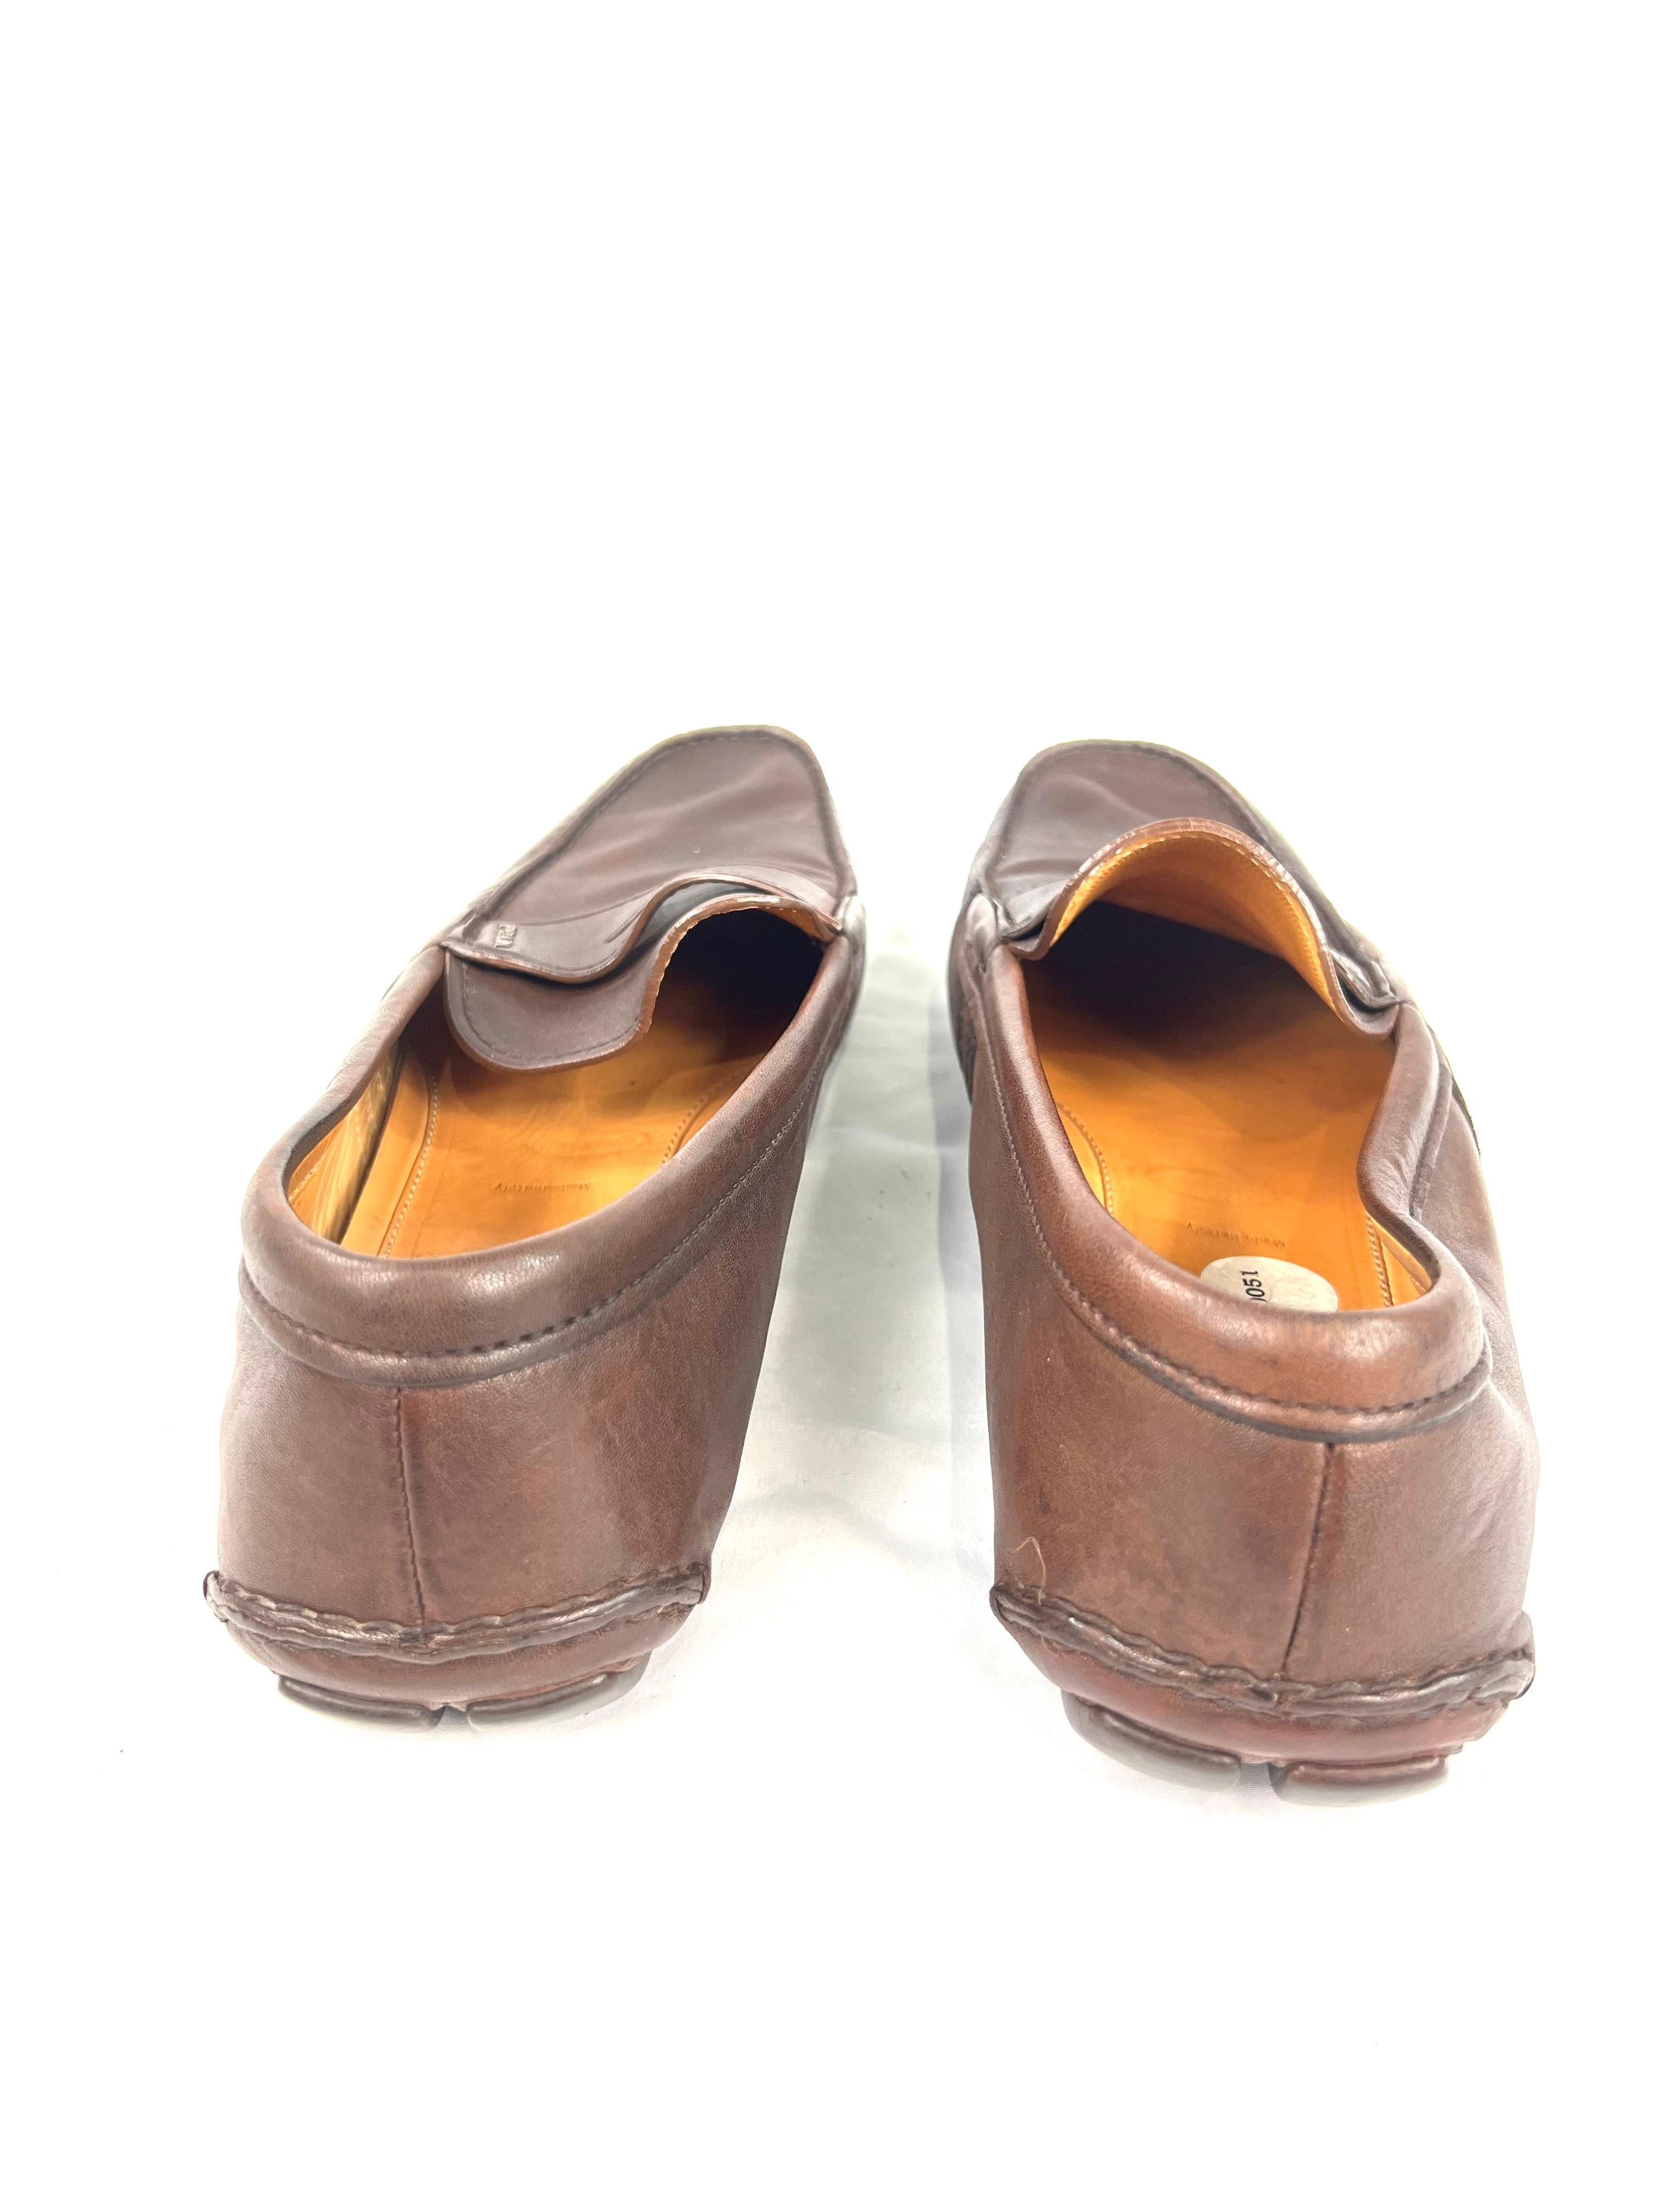 Prada Brown Leather Moccasins Flat Shoes, Size 11 For Sale 1